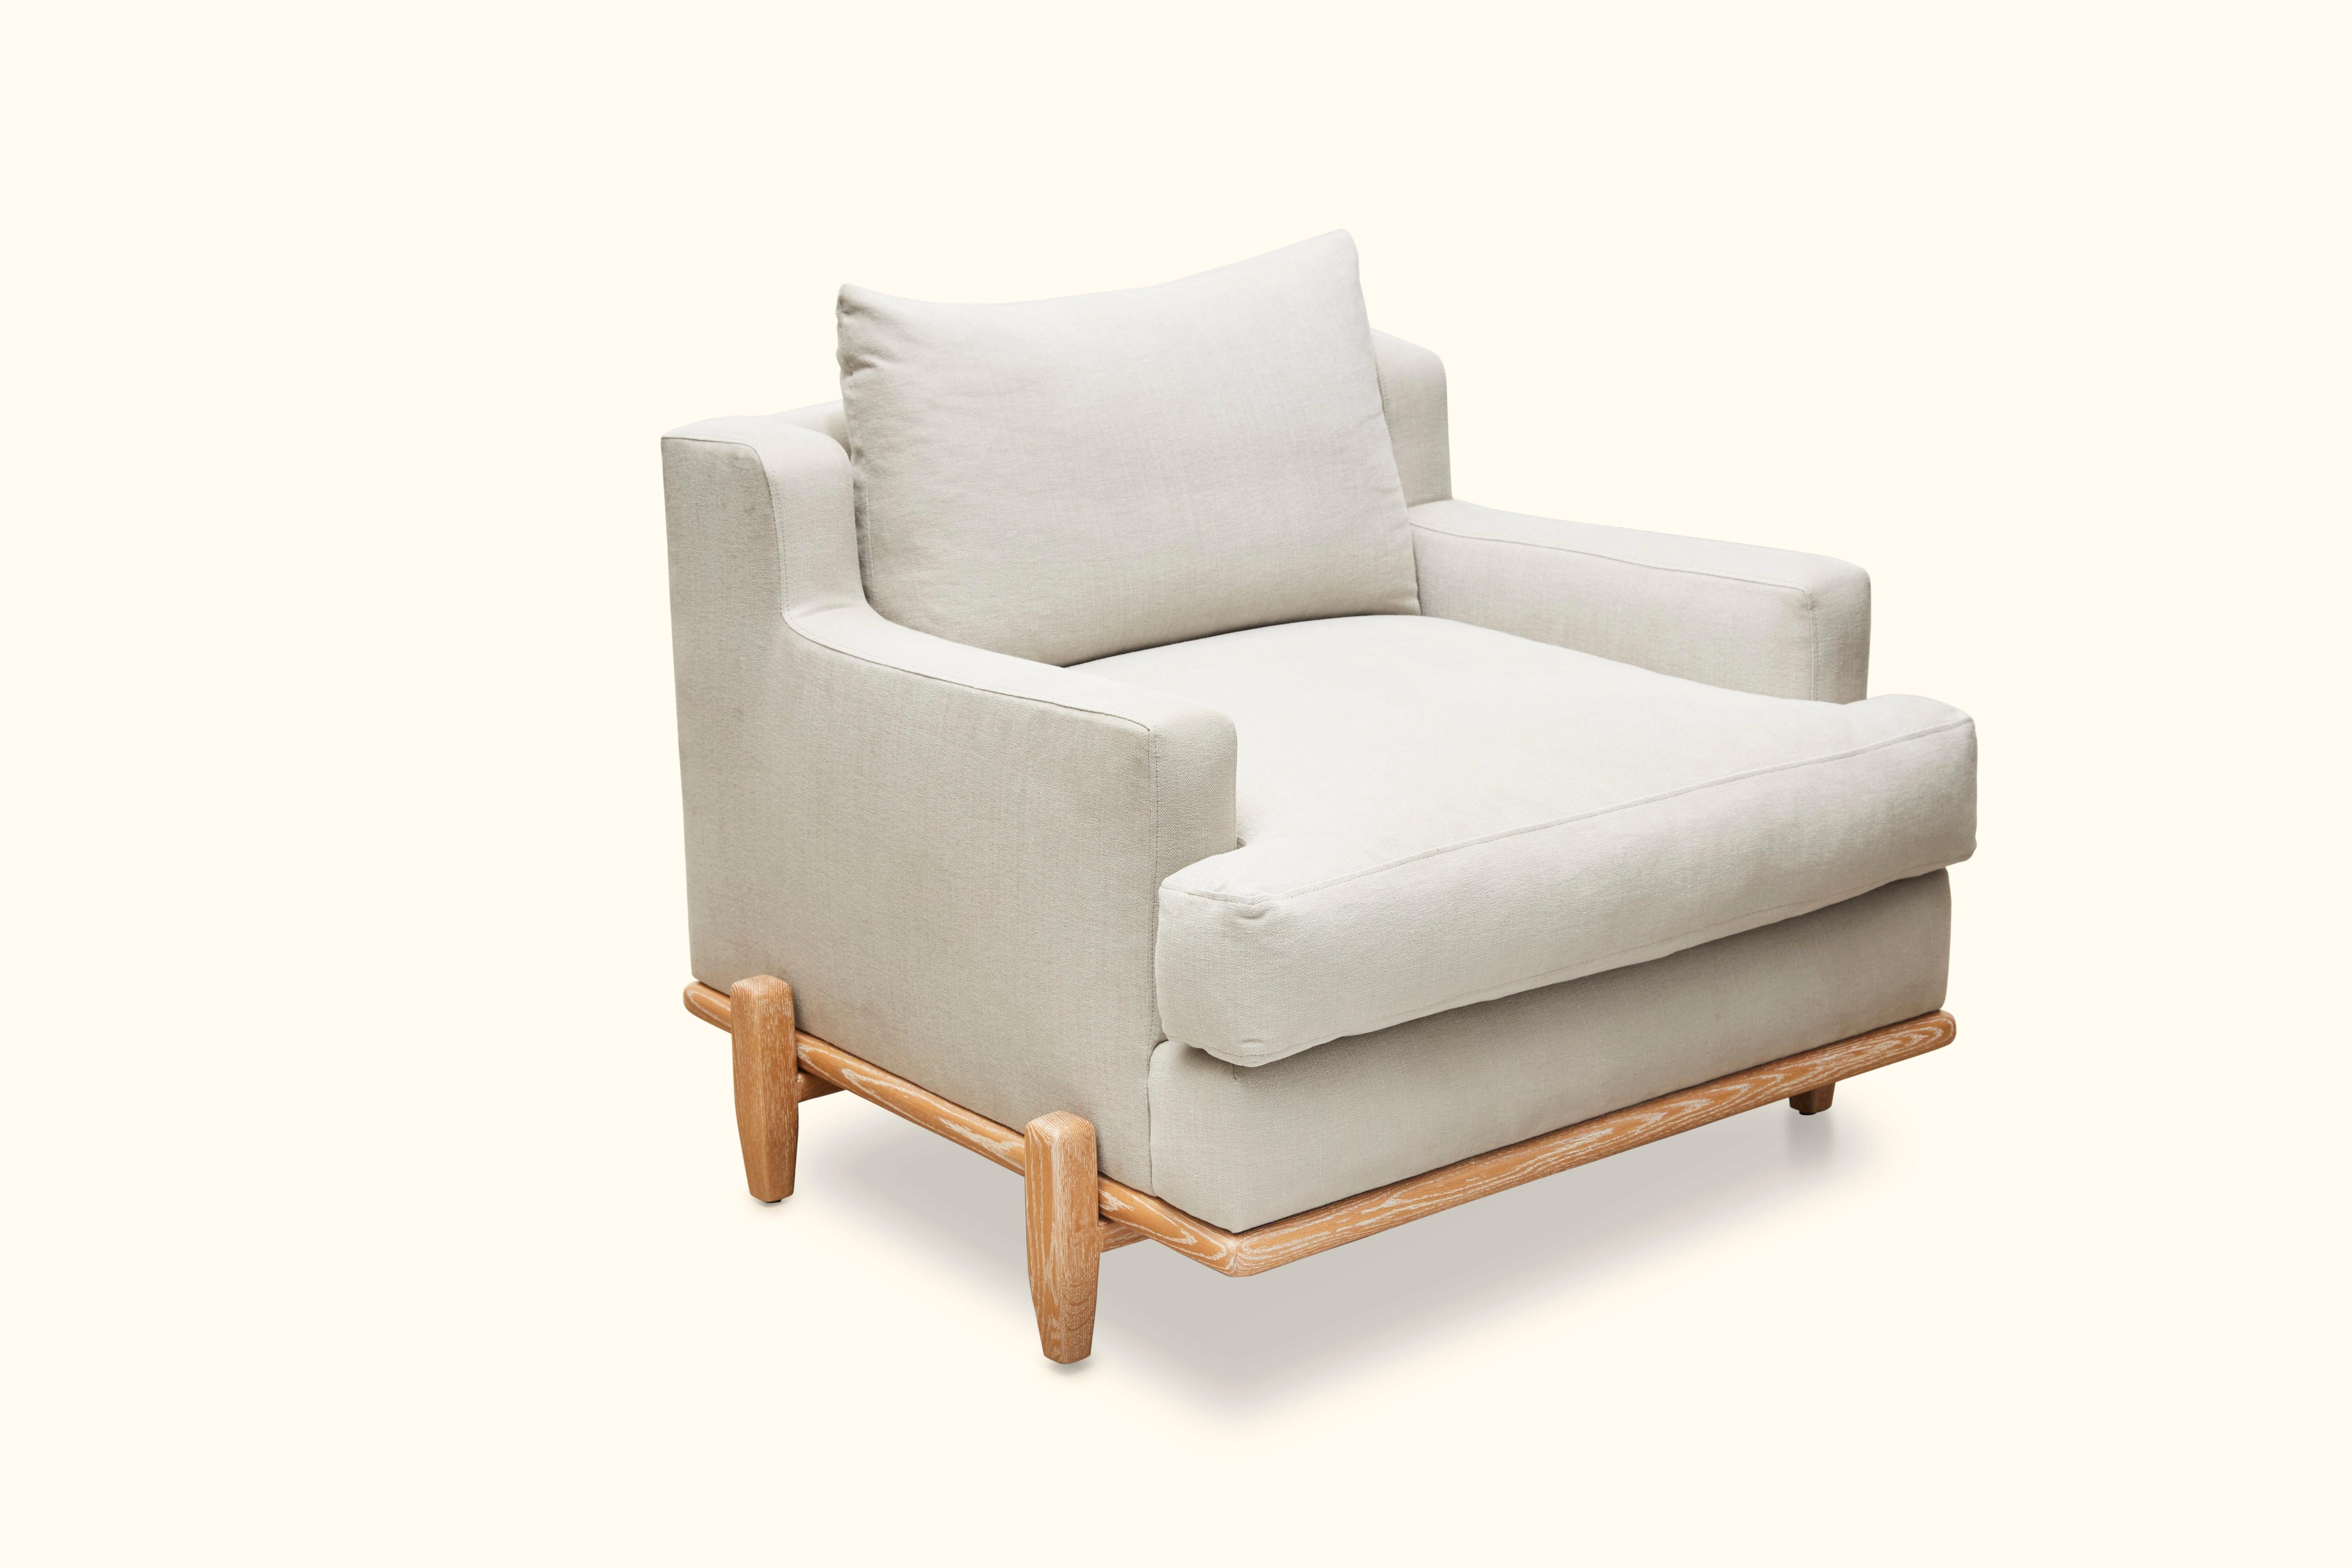 The George chair is part of the collaborative collection with interior designer Brian Paquette. The George chair is a low profile, but wide-scale lounge chair that rests on top of a solid wood base. Shown here in white linen and Cerused